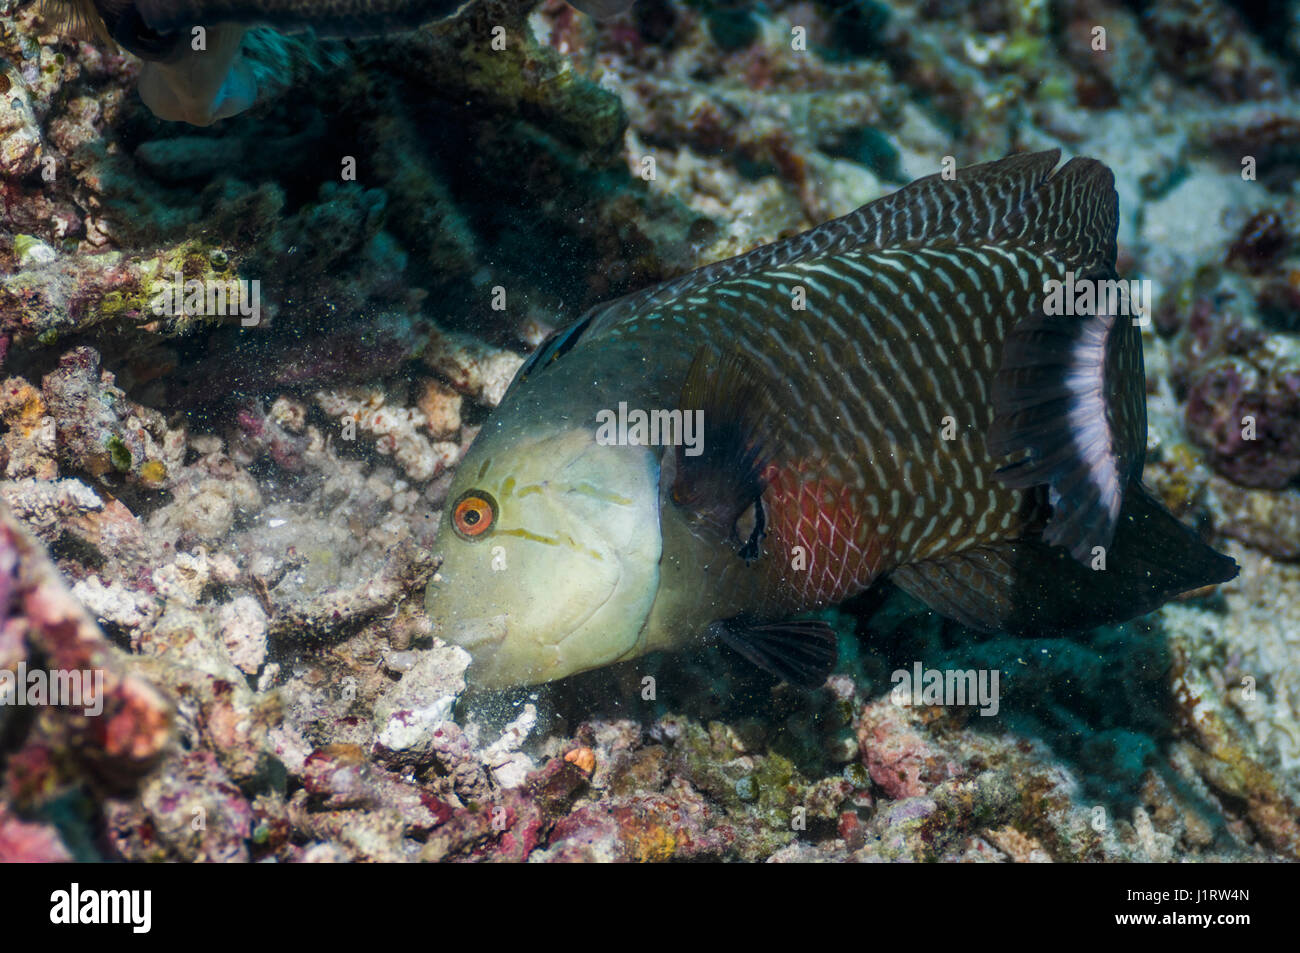 Rockmover or Dragon wrasse [Novaculichthys taeniourus] lifting coral rubble in the search for prey.  Indonesia. Stock Photo